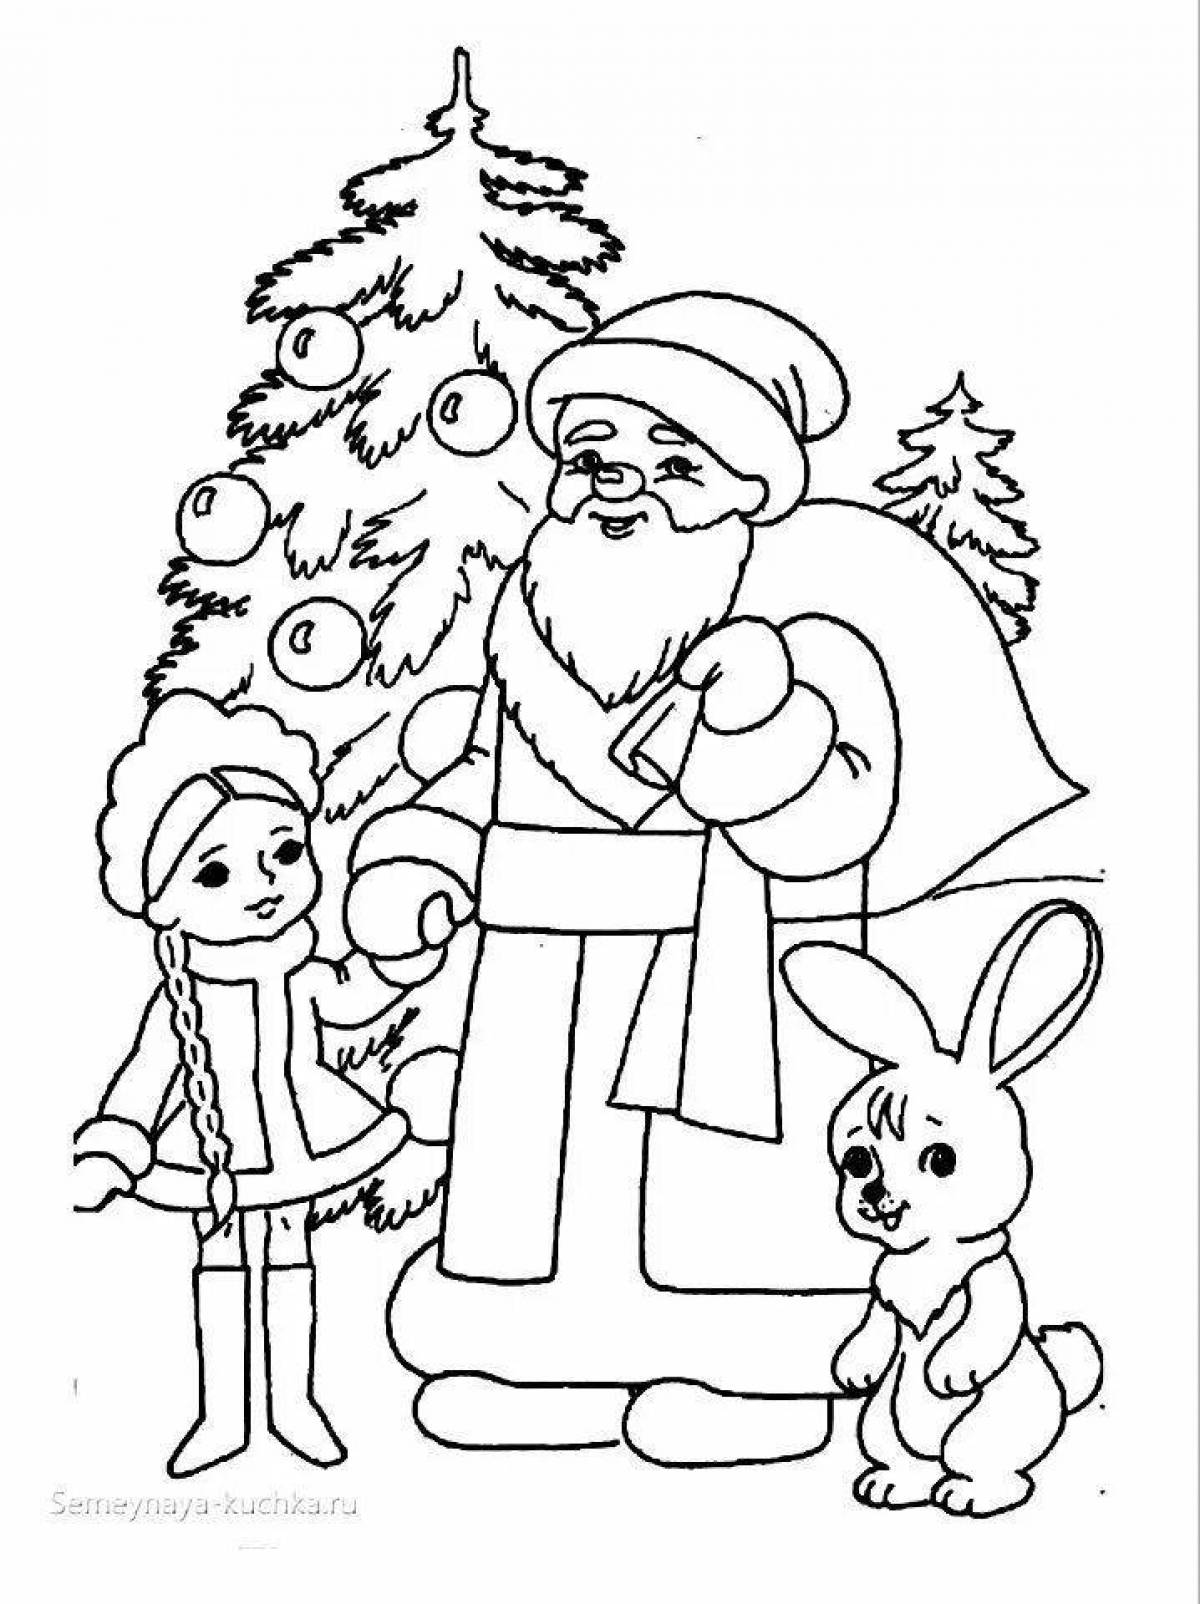 Exquisite Christmas tree coloring